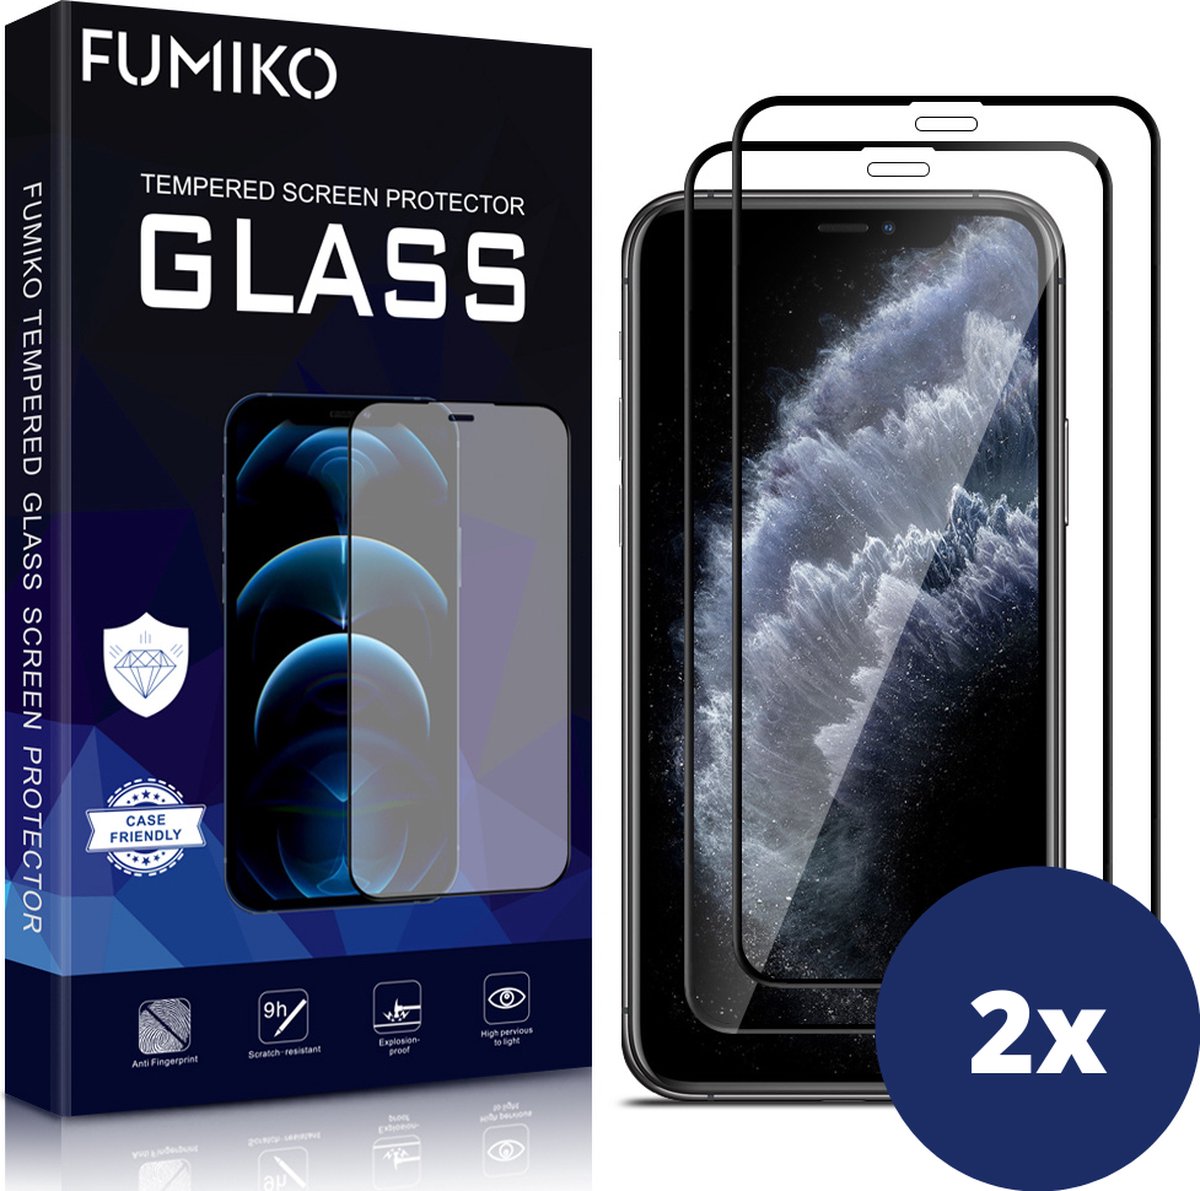 Screenprotector Tempered Glass Full Cover iPhone 11 Pro/ iPhone Xs/ iPhone X - Screen Protector Beschermglas iPhone 11 Pro/ iPhone Xs/ iPhone X - 2 Stuks